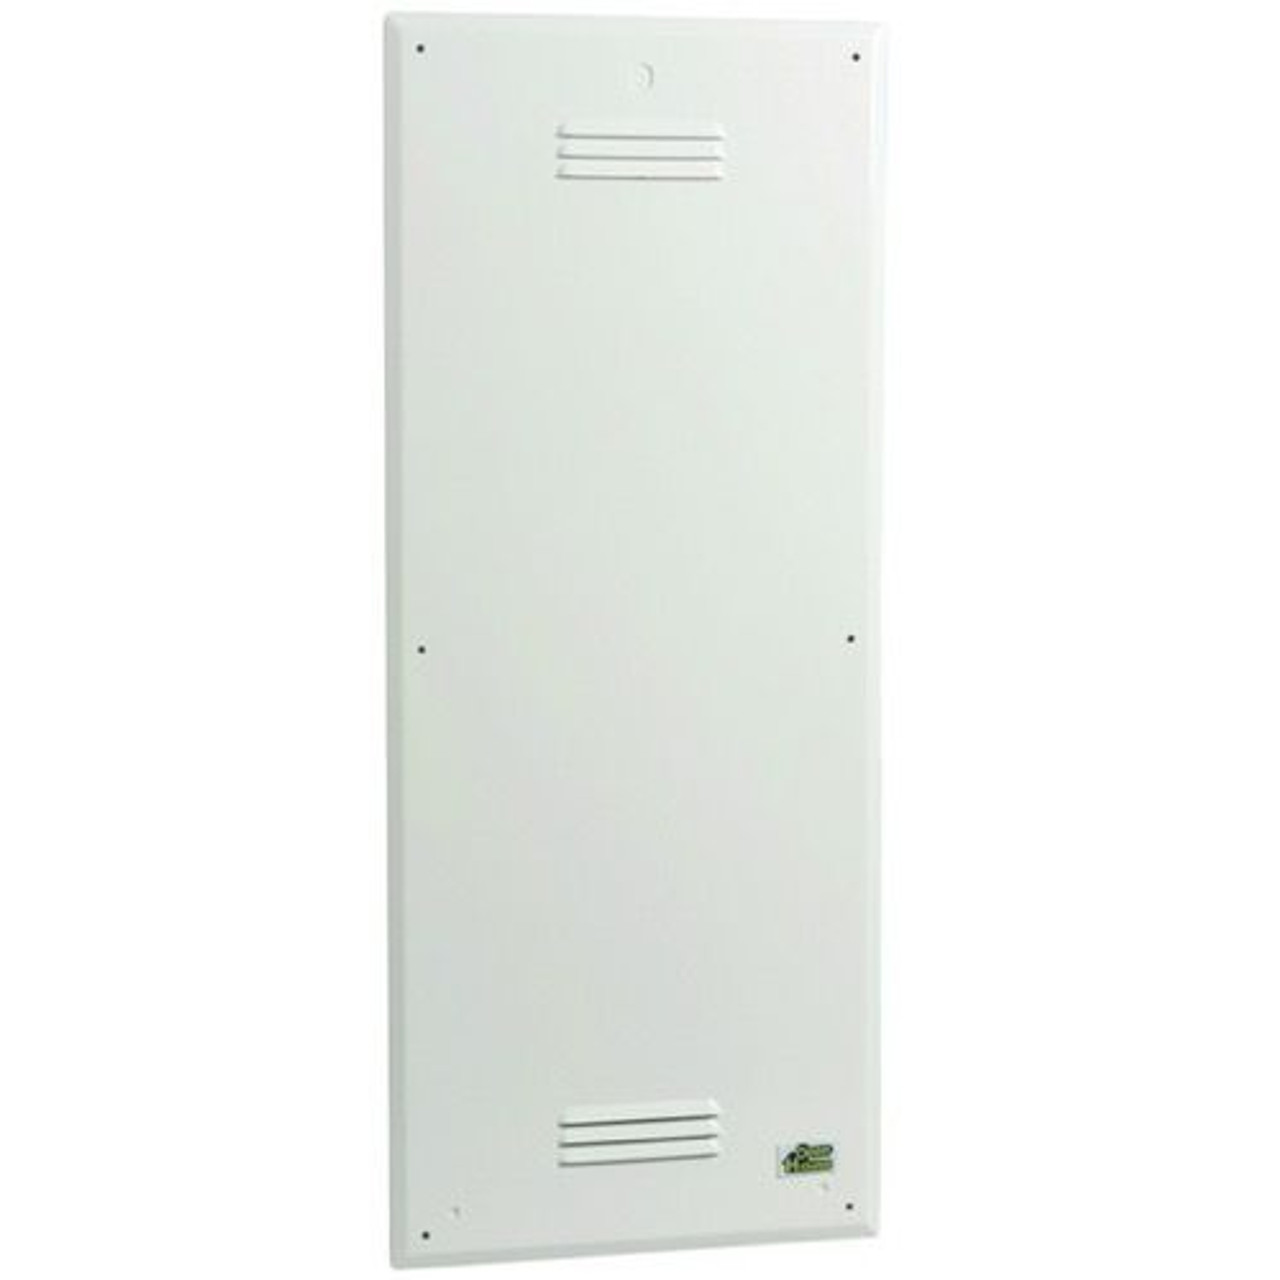 Linear HC36A 36" Inch Enclosure Cover Panel White Snap-On Painted Steel Locking Screw Fits H336 Home Video Hub Master Junction Box Cover for Home AV Telephone Data Distribution Systems